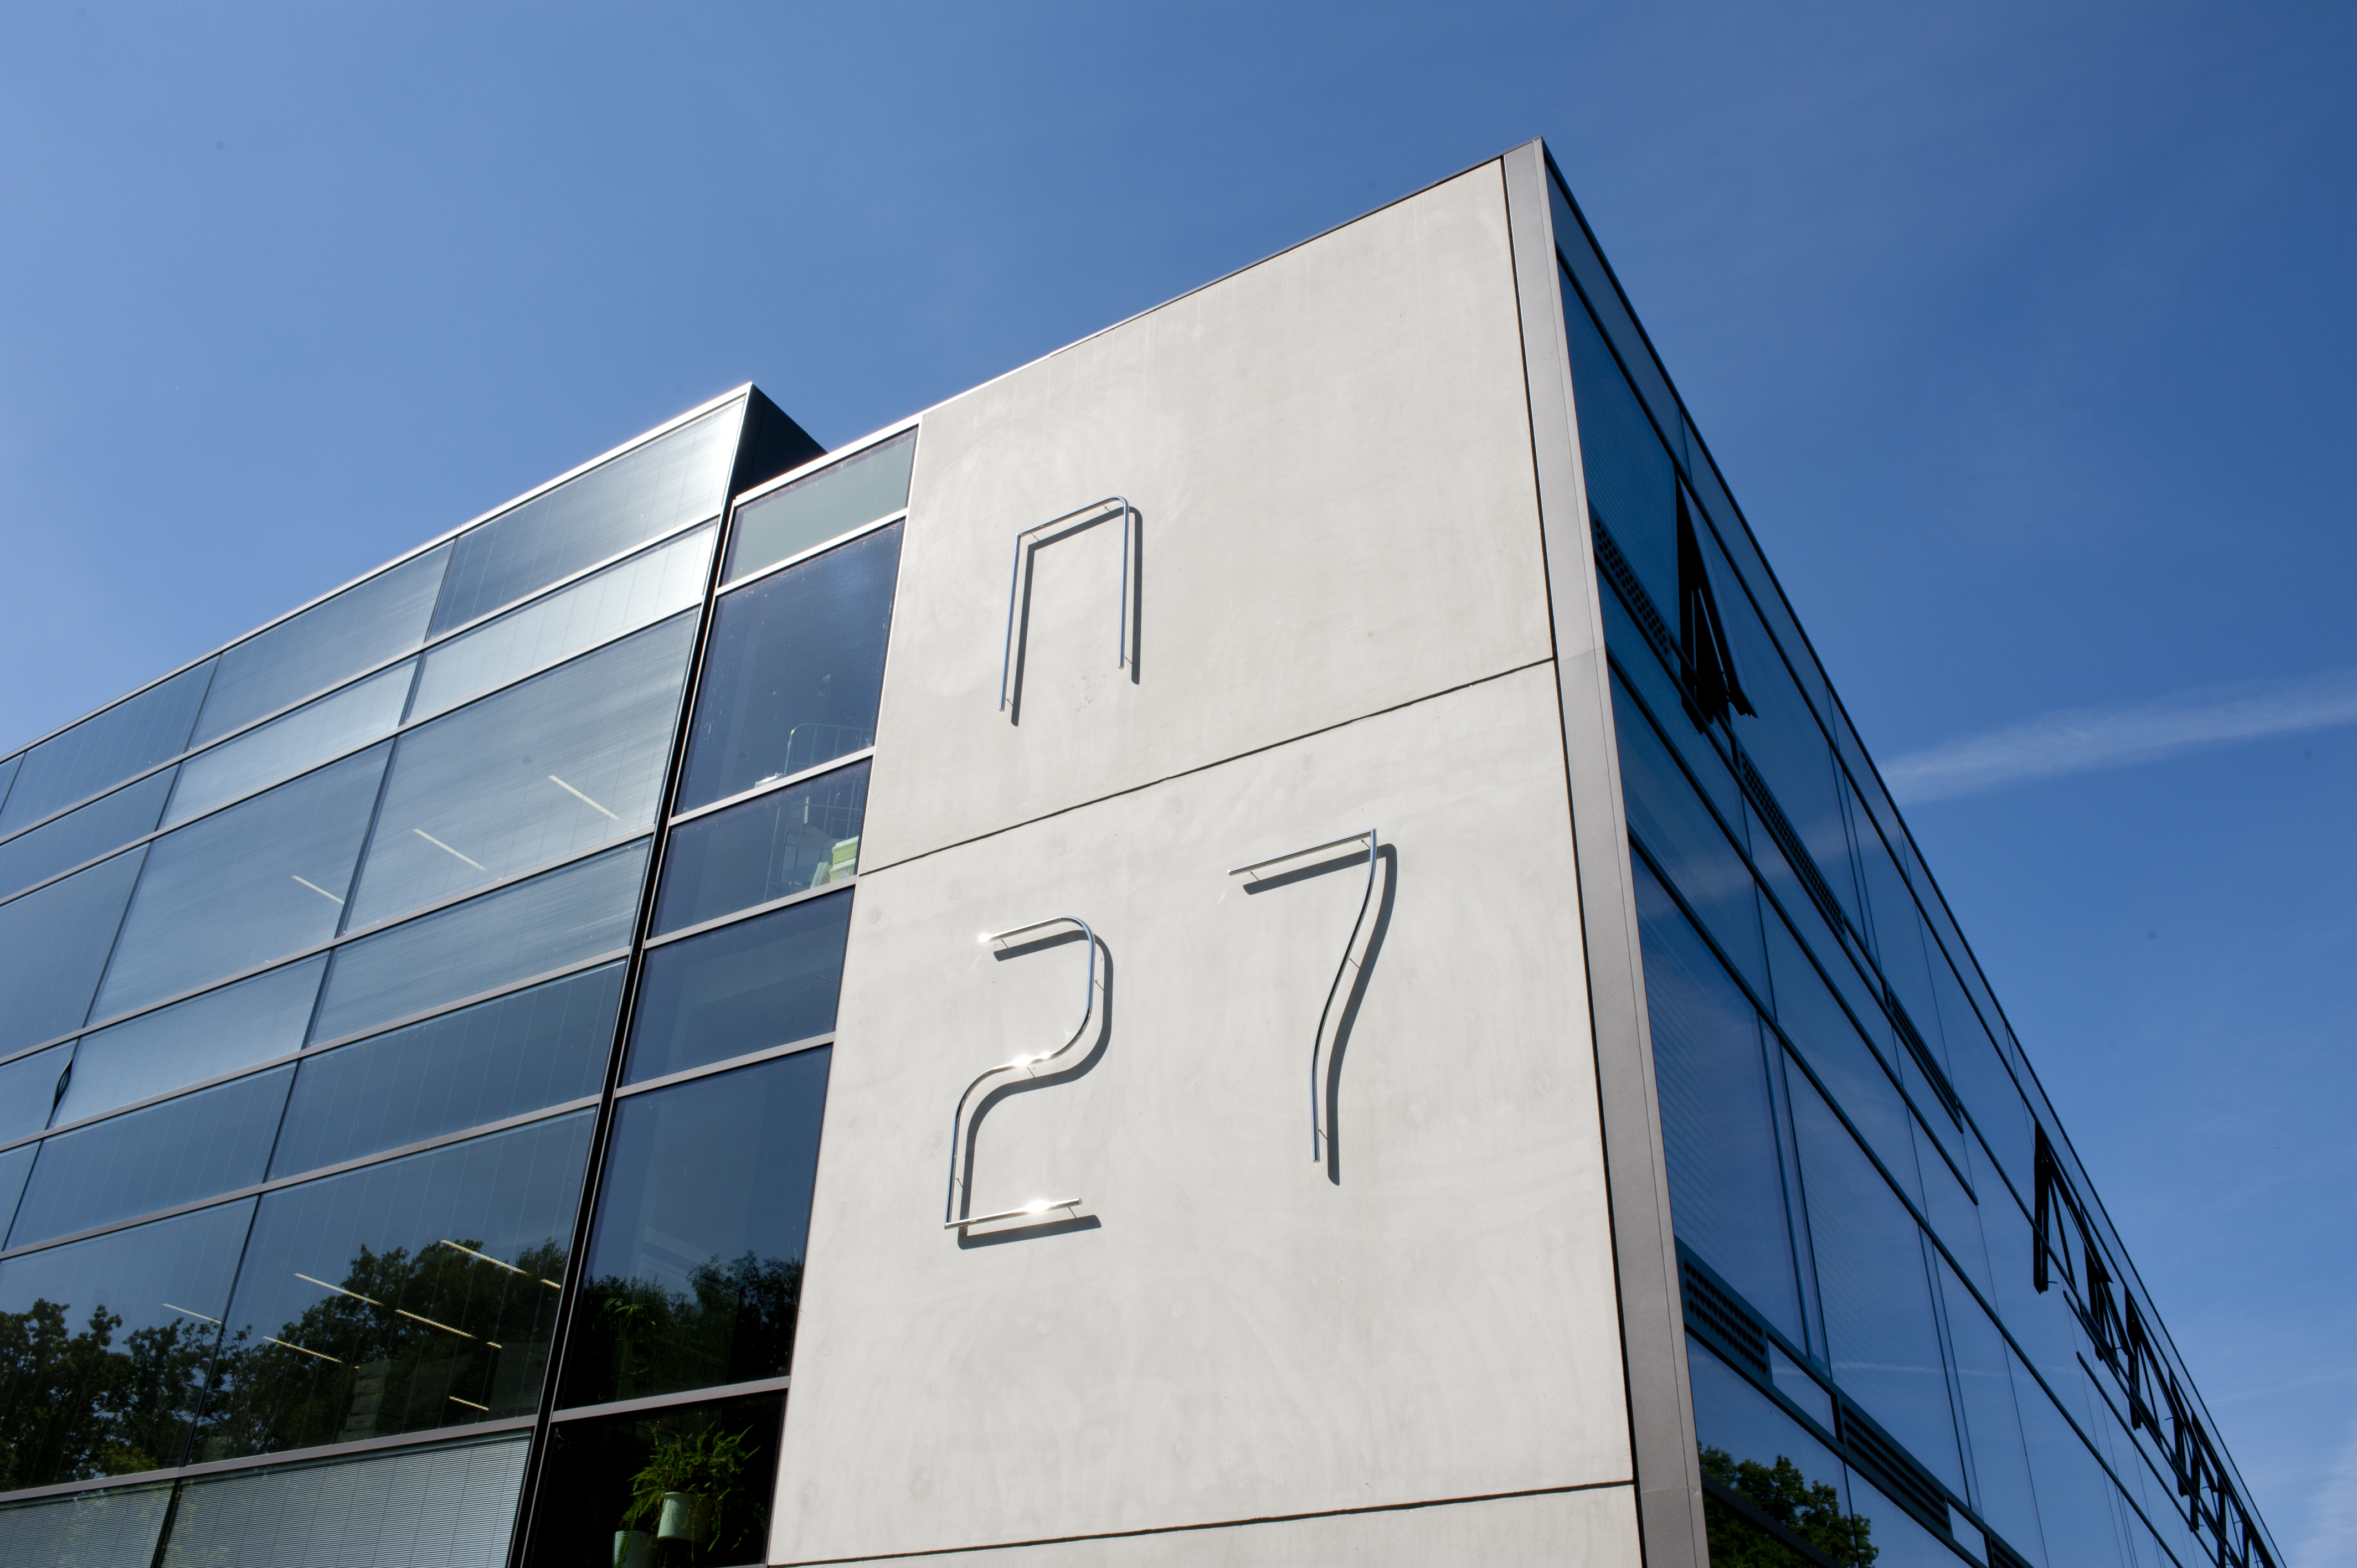 Research building N27